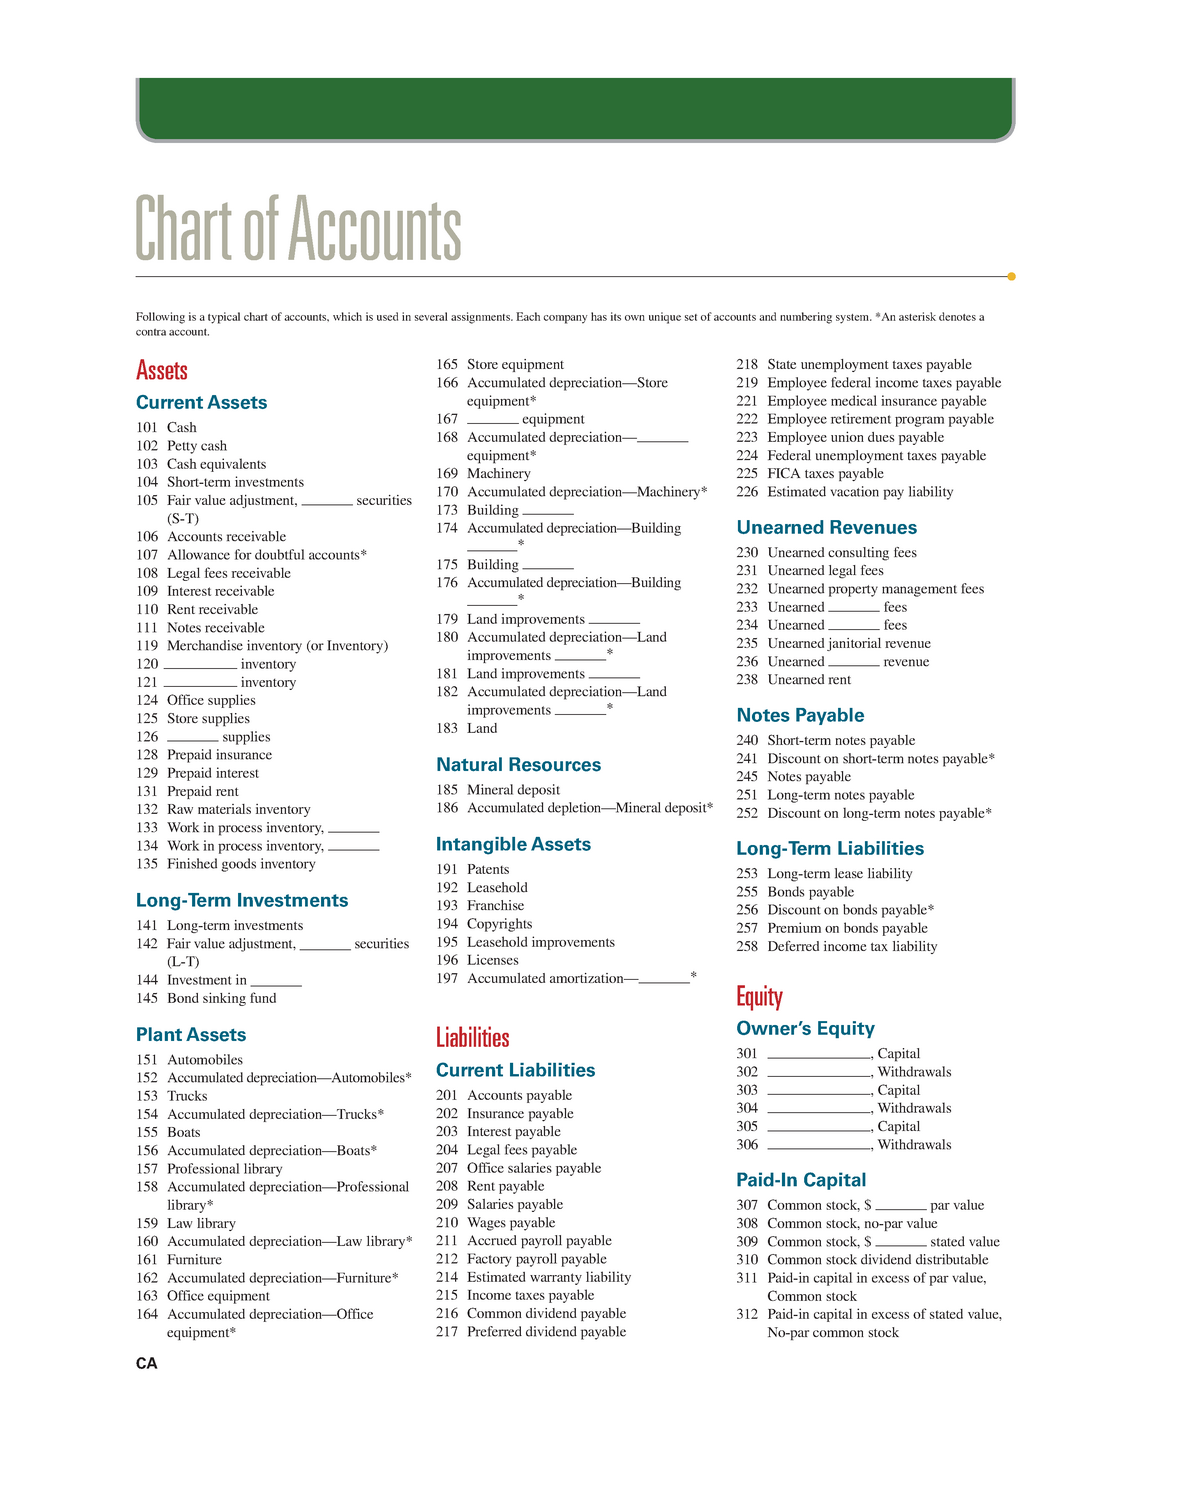 01-chart-of-accounts-lecture-notes-1-following-is-a-typical-chart-of-accounts-which-is